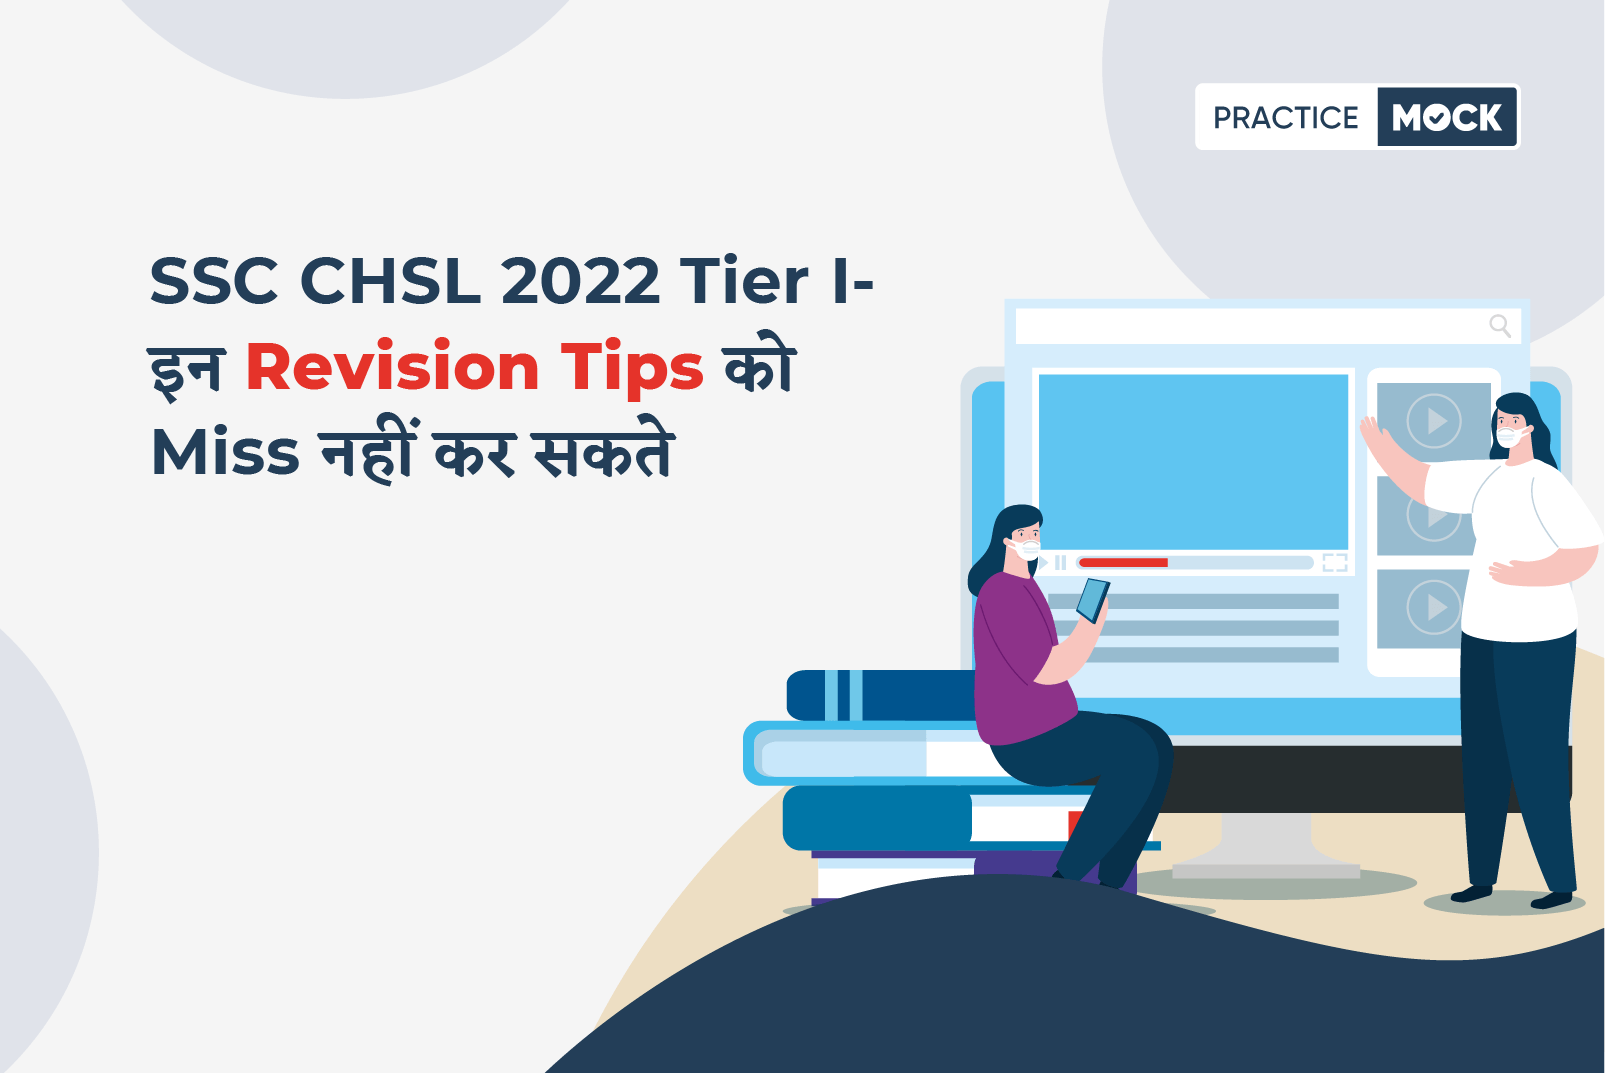 SSC CHSL Revision Tips for Tier I Exam